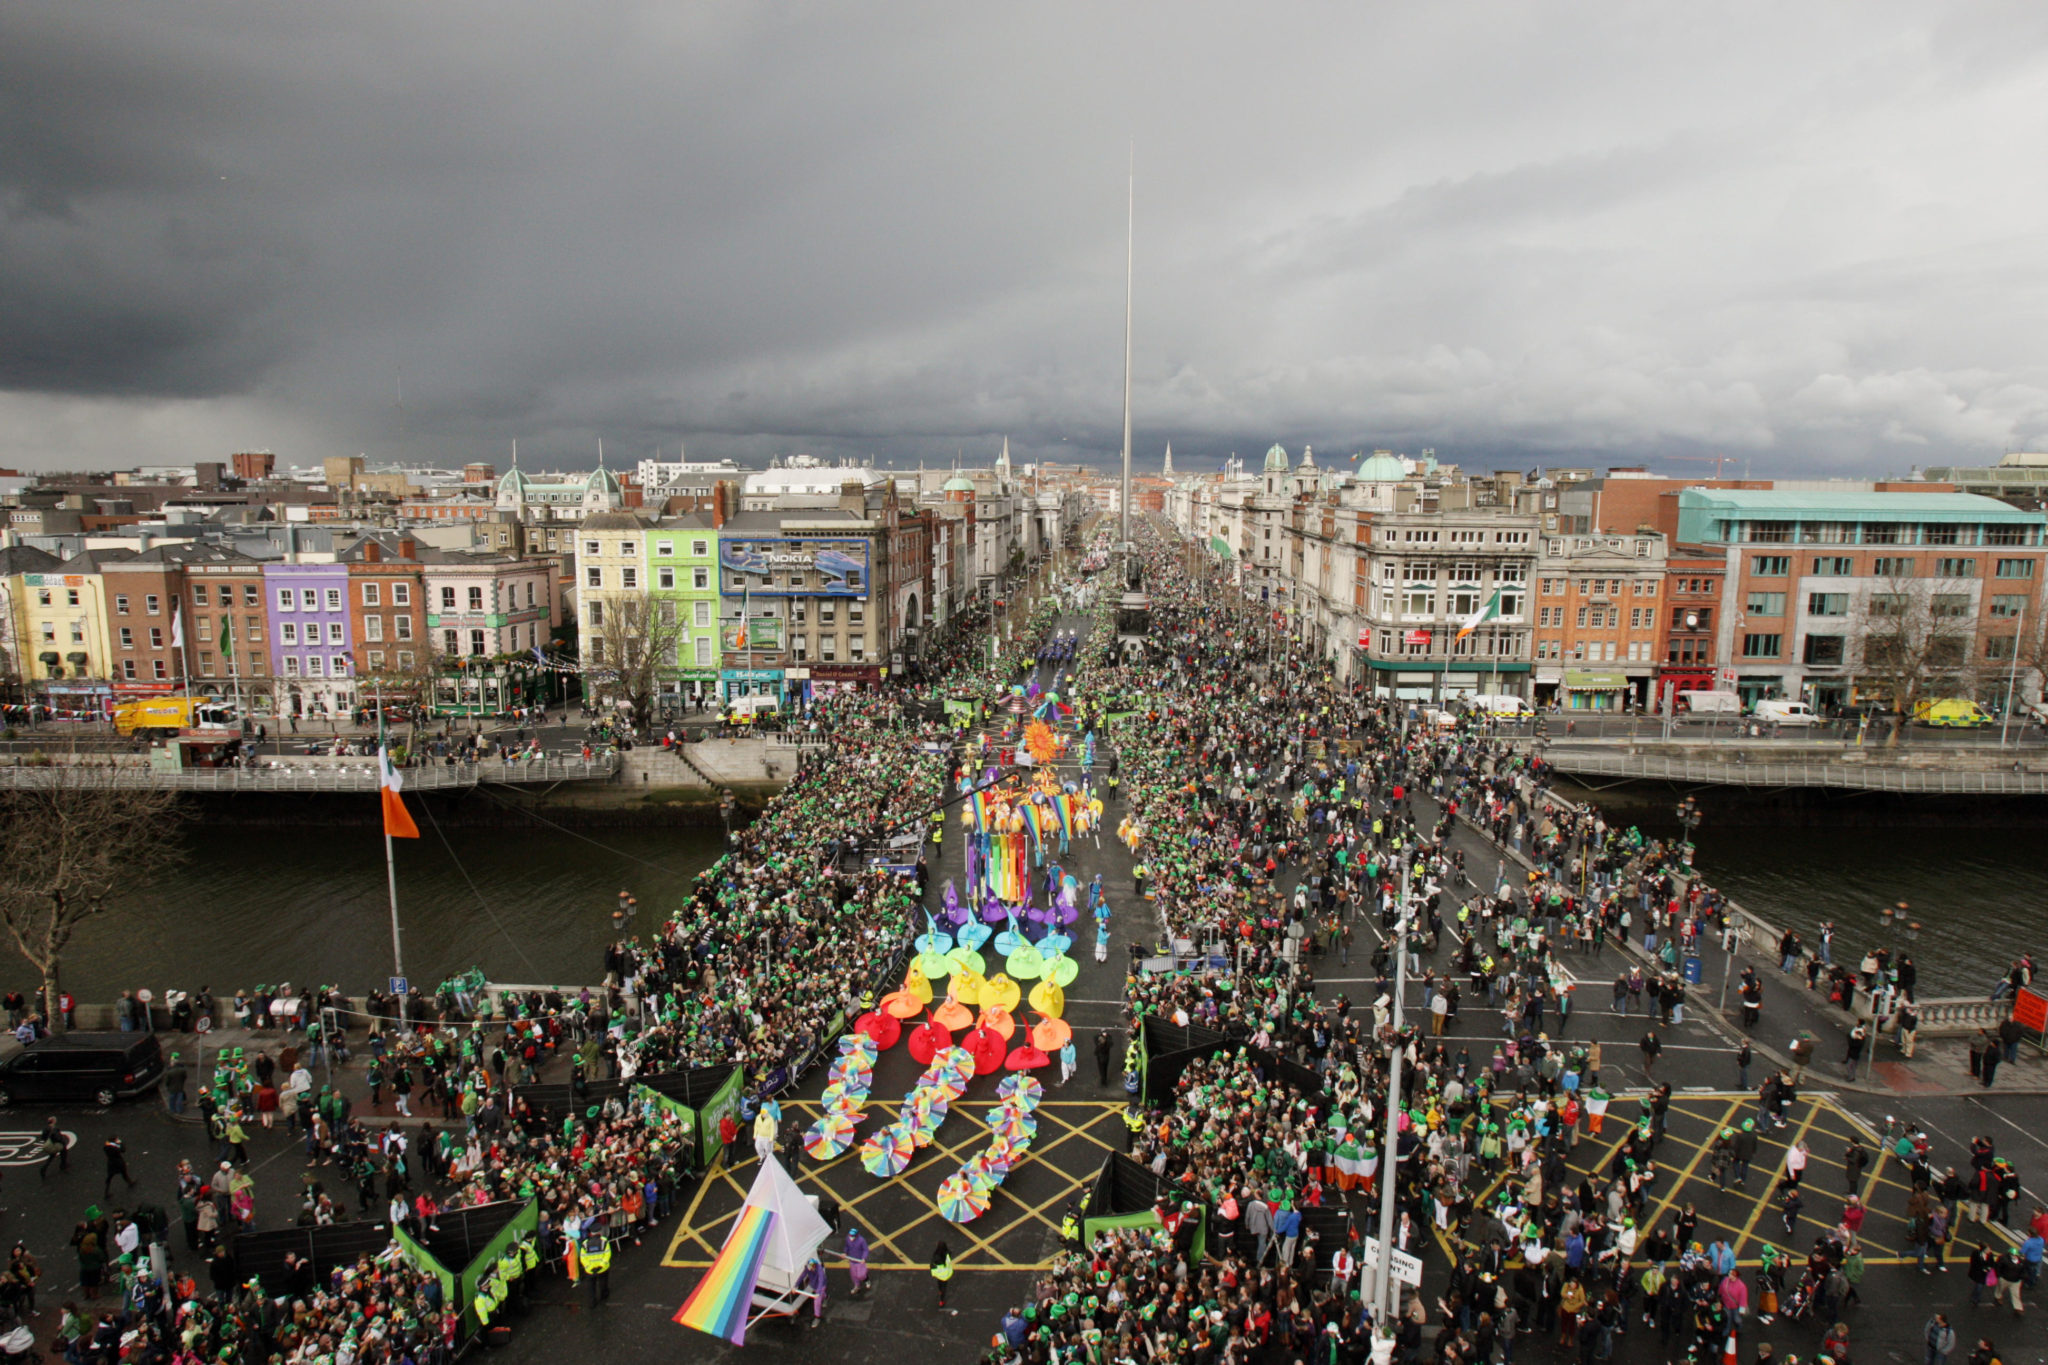 Crowds gather for the St Patrick's Day Parade on Dublin's O'Connell Street in March 2012